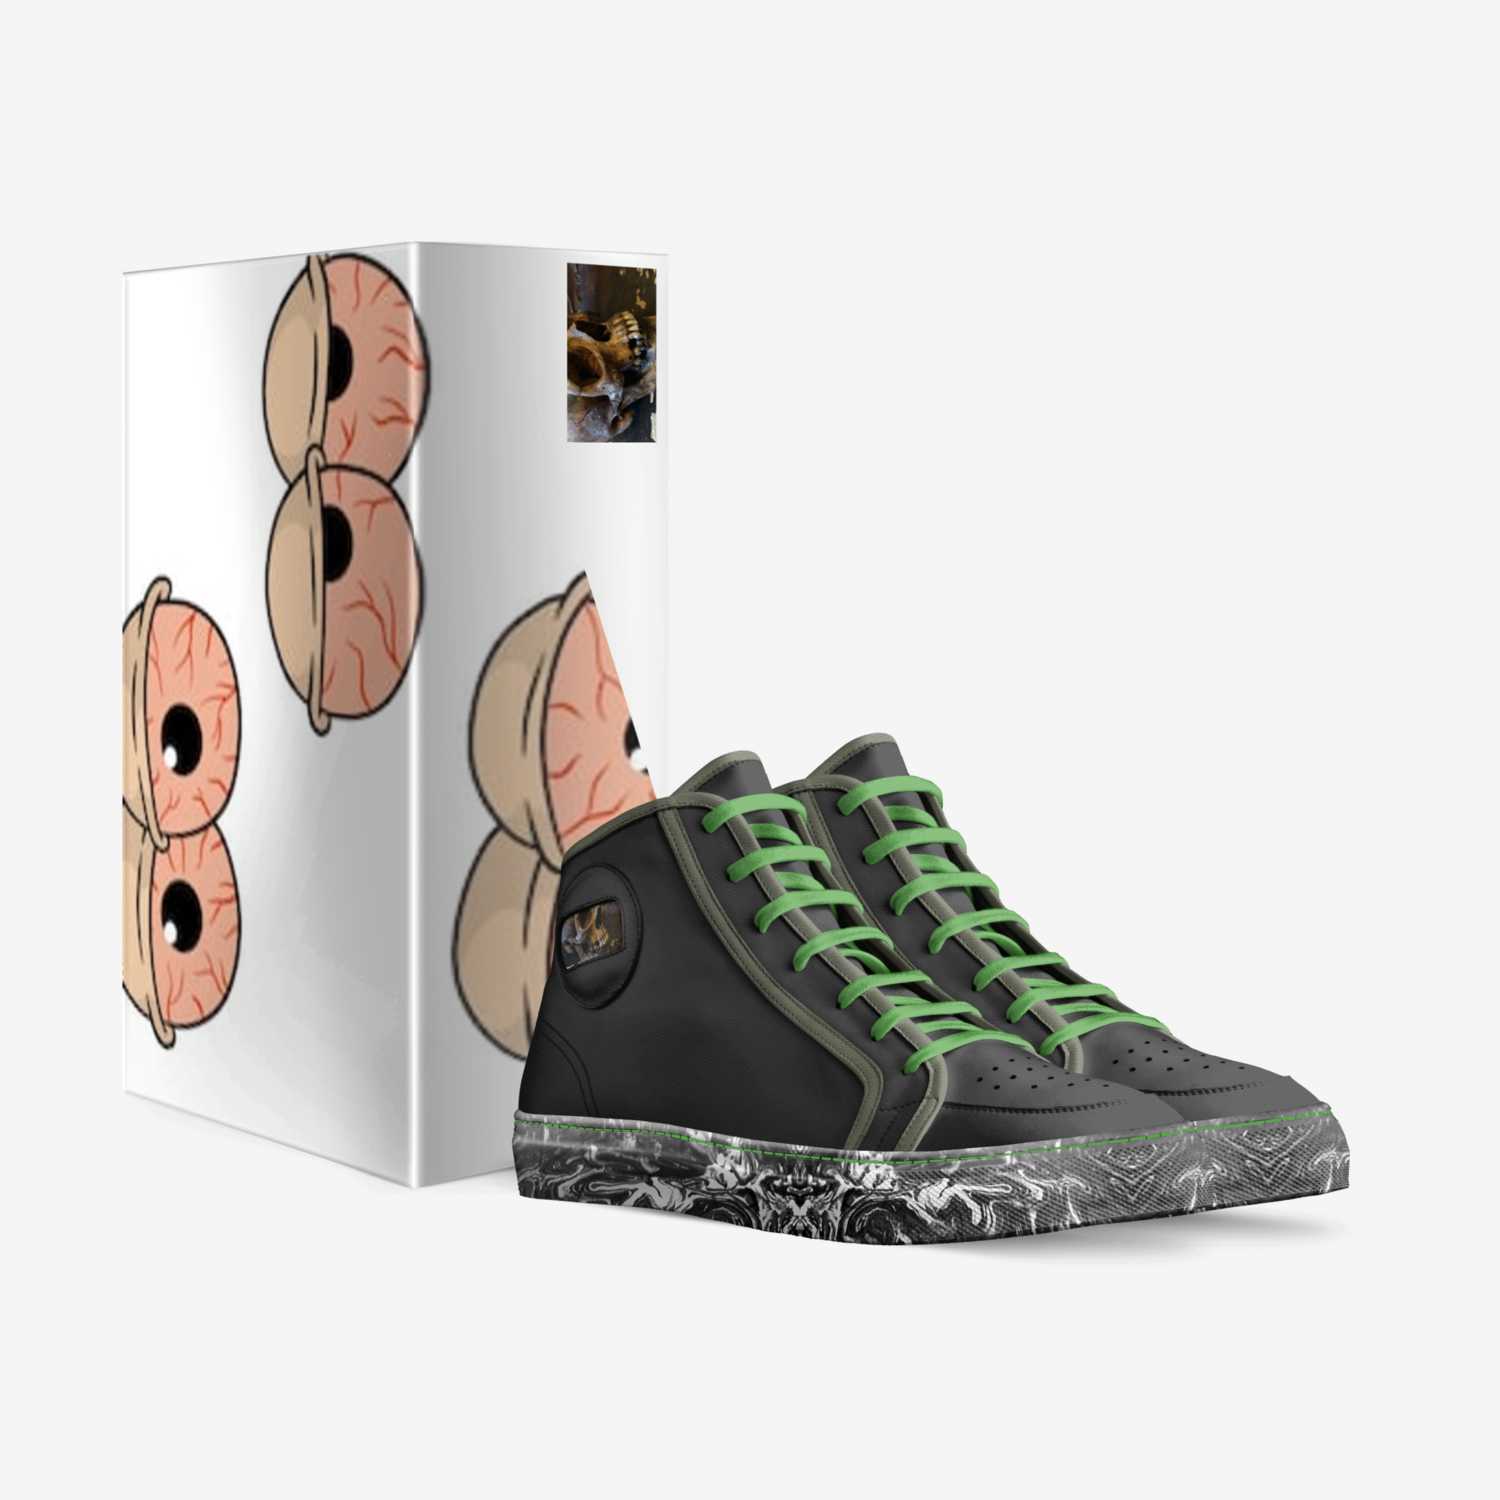 S.S. Green Team custom made in Italy shoes by Levi Serafini | Box view